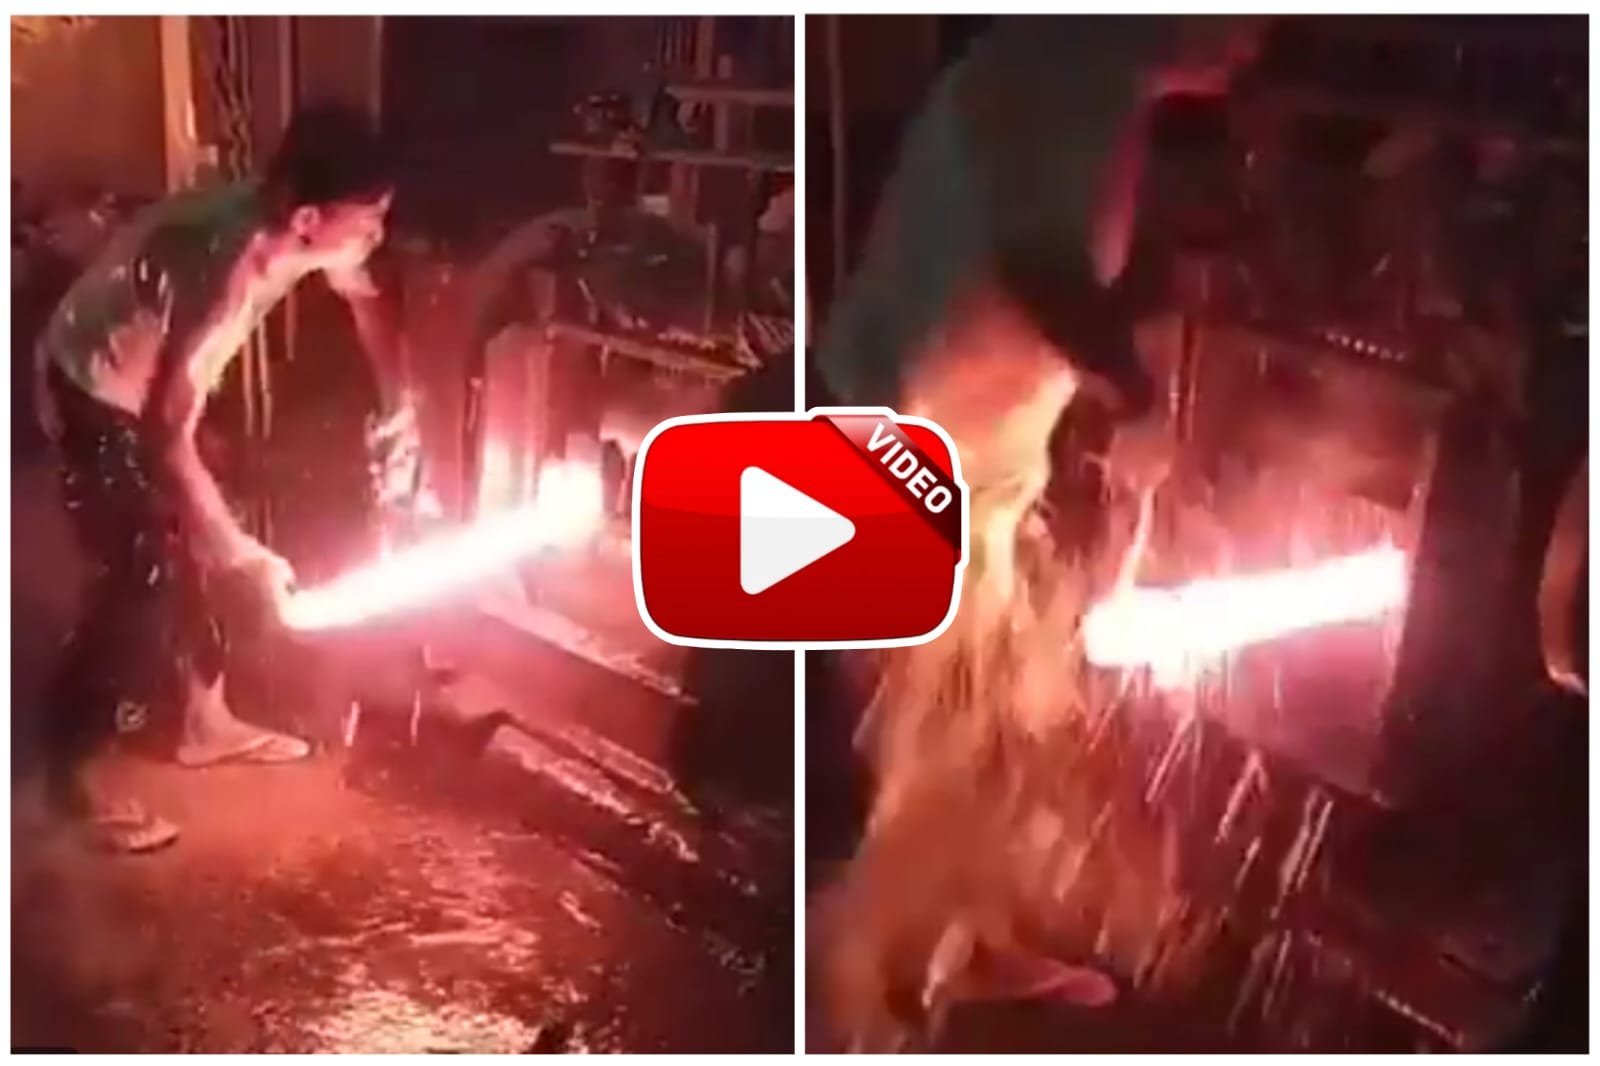 Iron Rod Making Video - This is how rods are prepared from hot iron in the factory.